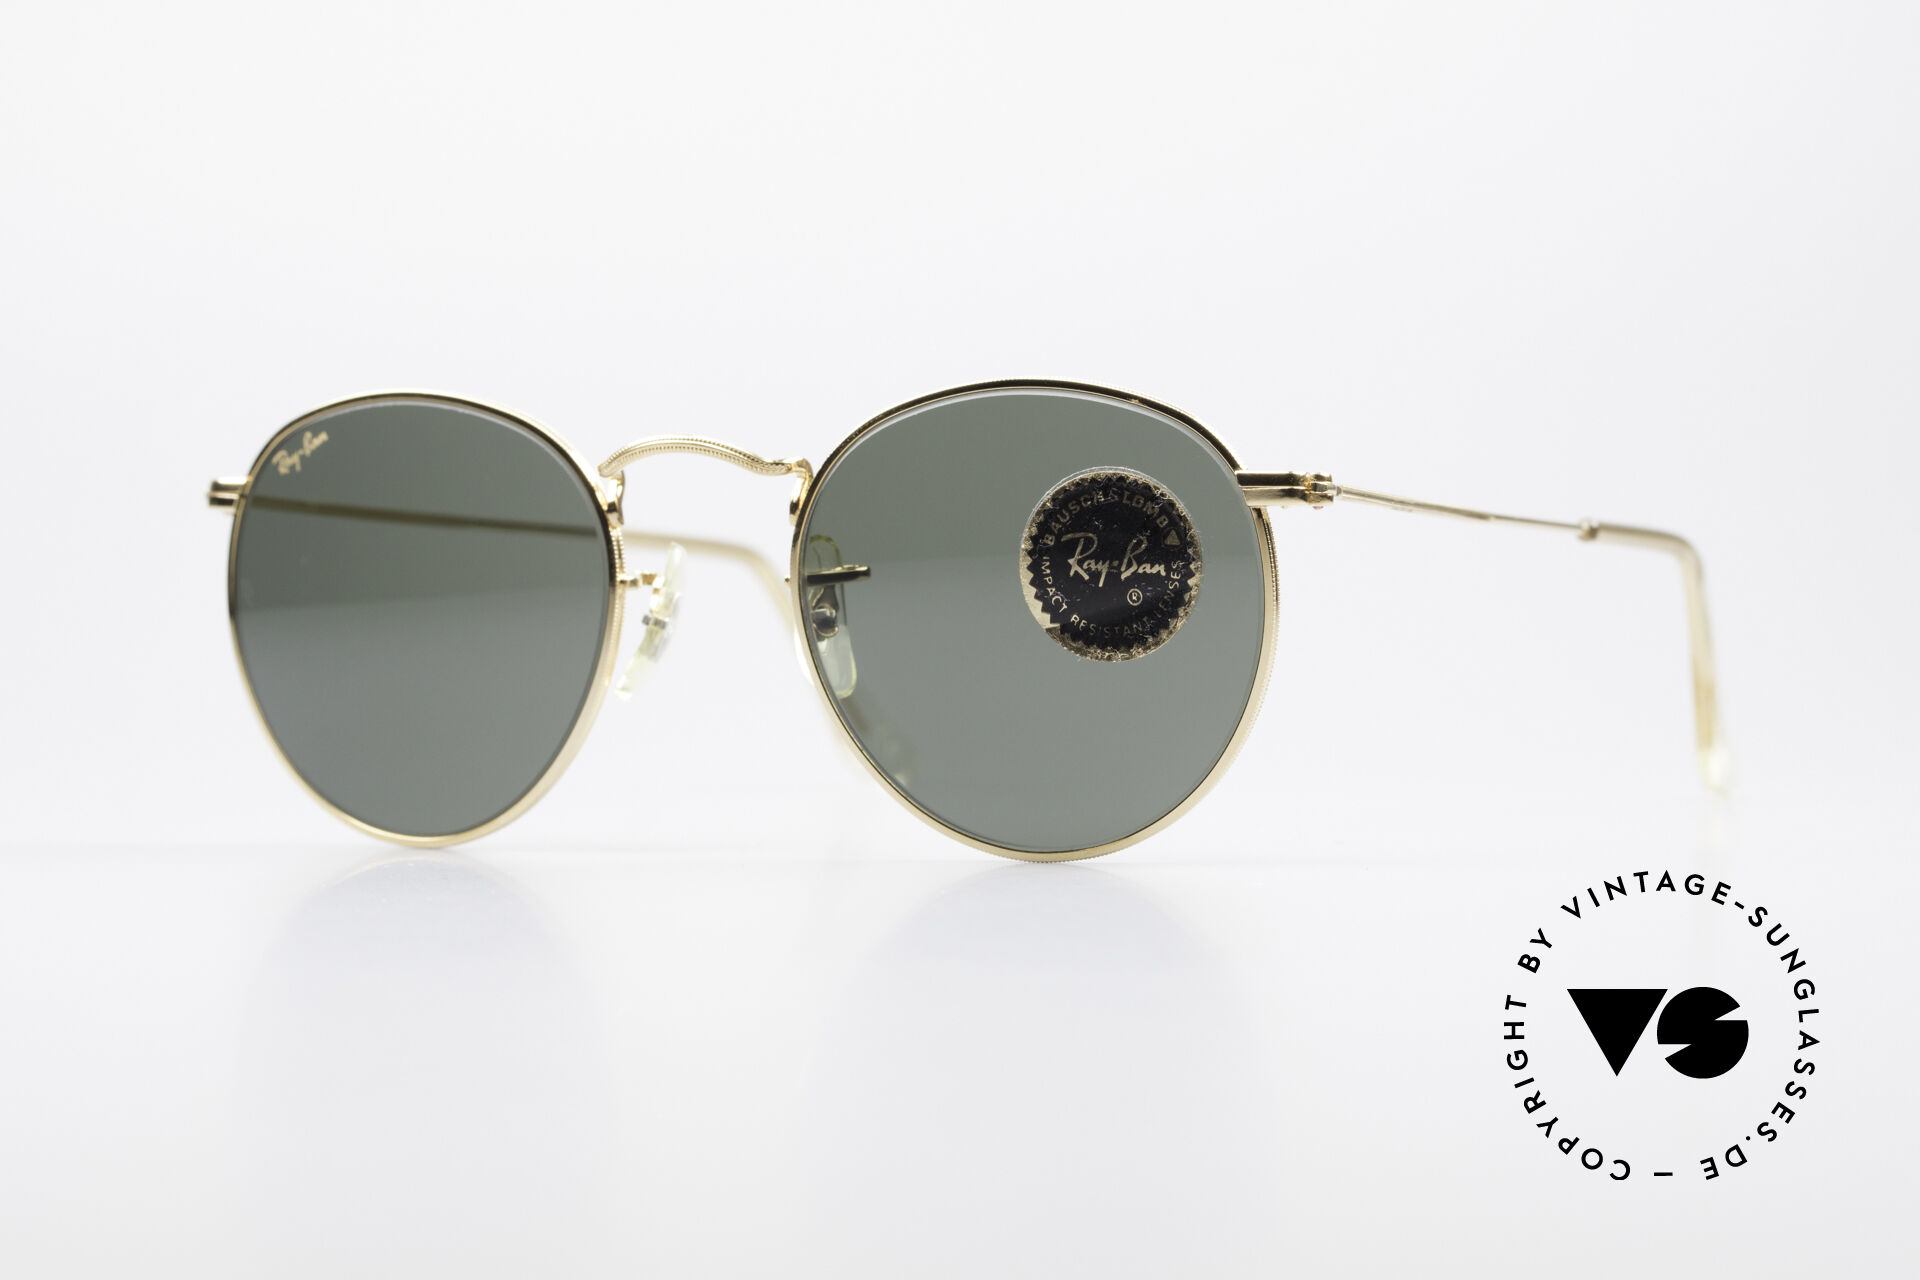 https://www.vintage-sunglasses.de/media/products6/full/14466_17192_Ray-Ban-Round-Metal-47_Small-Round-BandL-Sunglasses_Men_Women_Round_Sunglasses.jpg